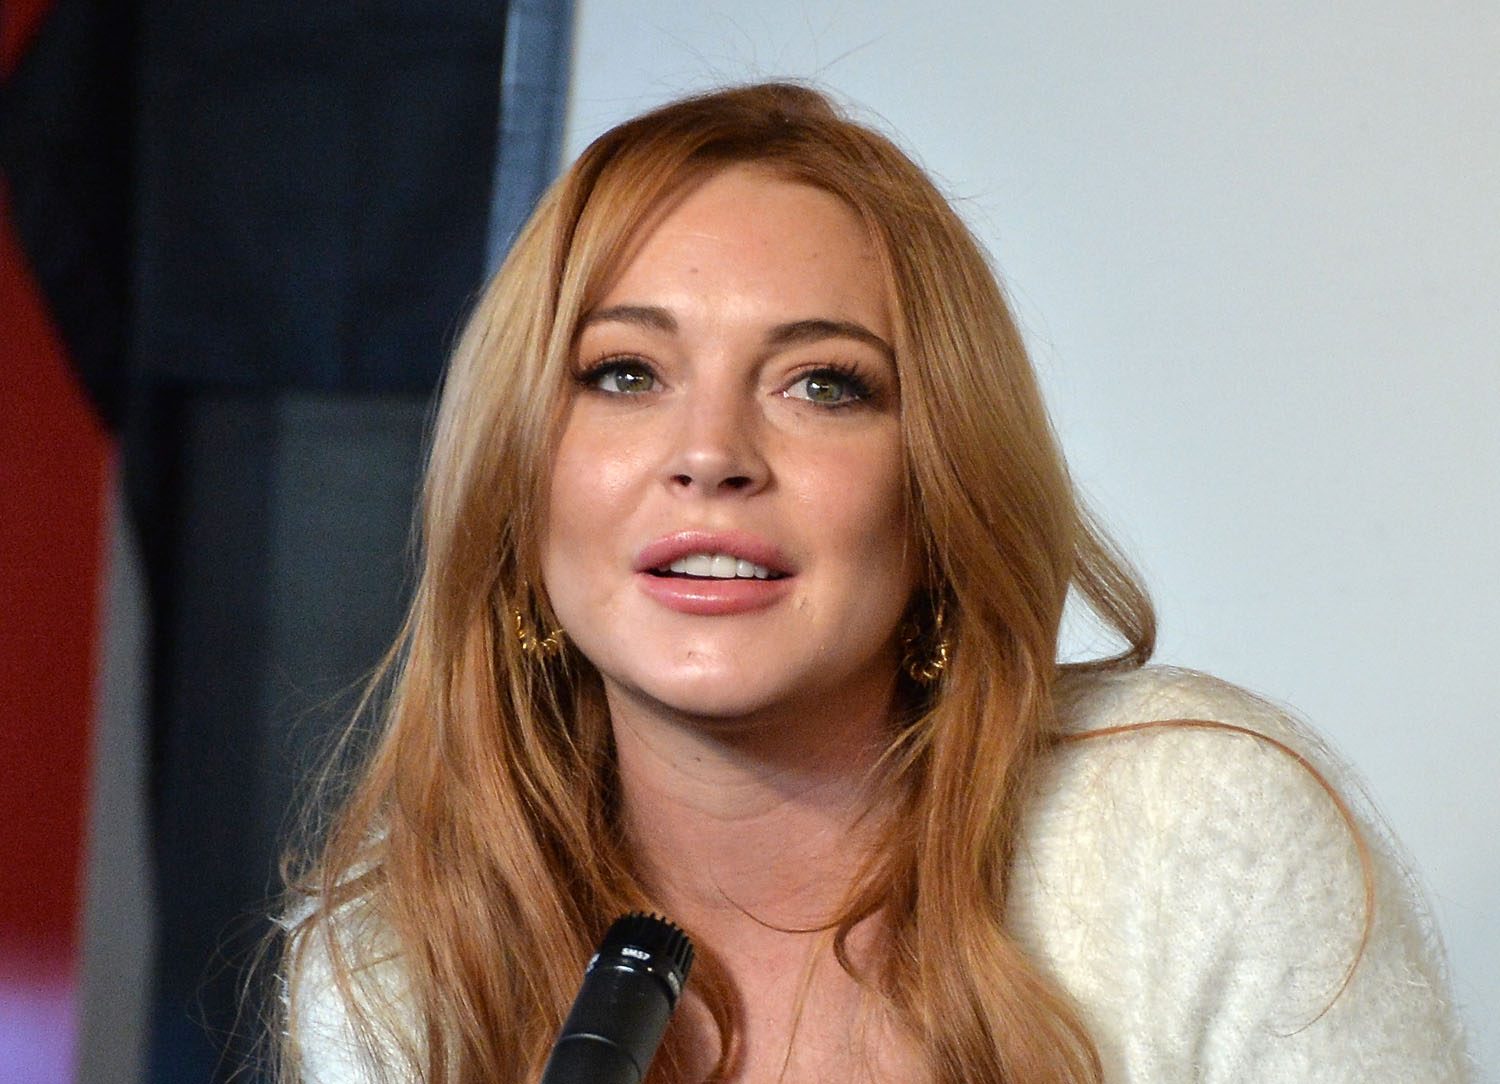 Actress Lindsay Lohan speaks at a press conference on Jan. 20, 2014 in Park City, Utah.  